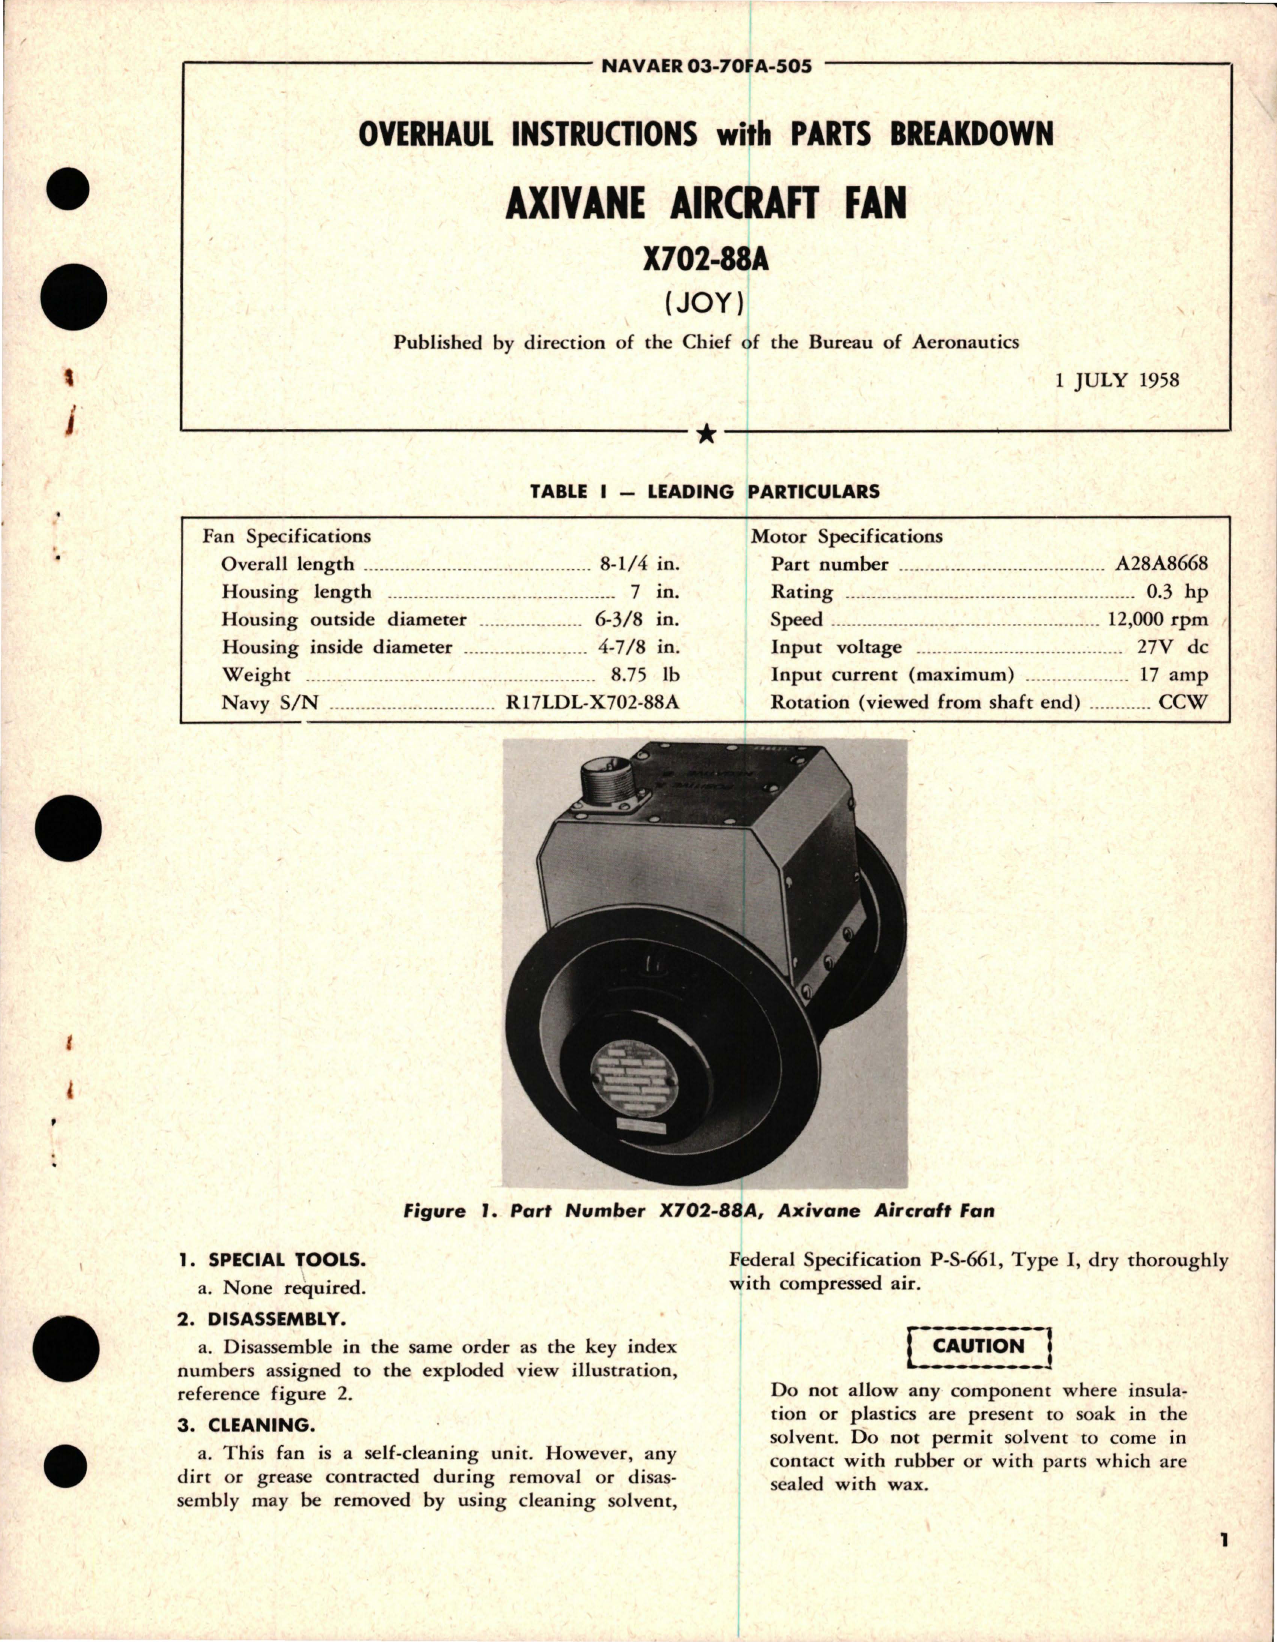 Sample page 1 from AirCorps Library document: Overhaul Instructions with Parts Breakdown for Axvane Aircraft Fan - X702-88A 